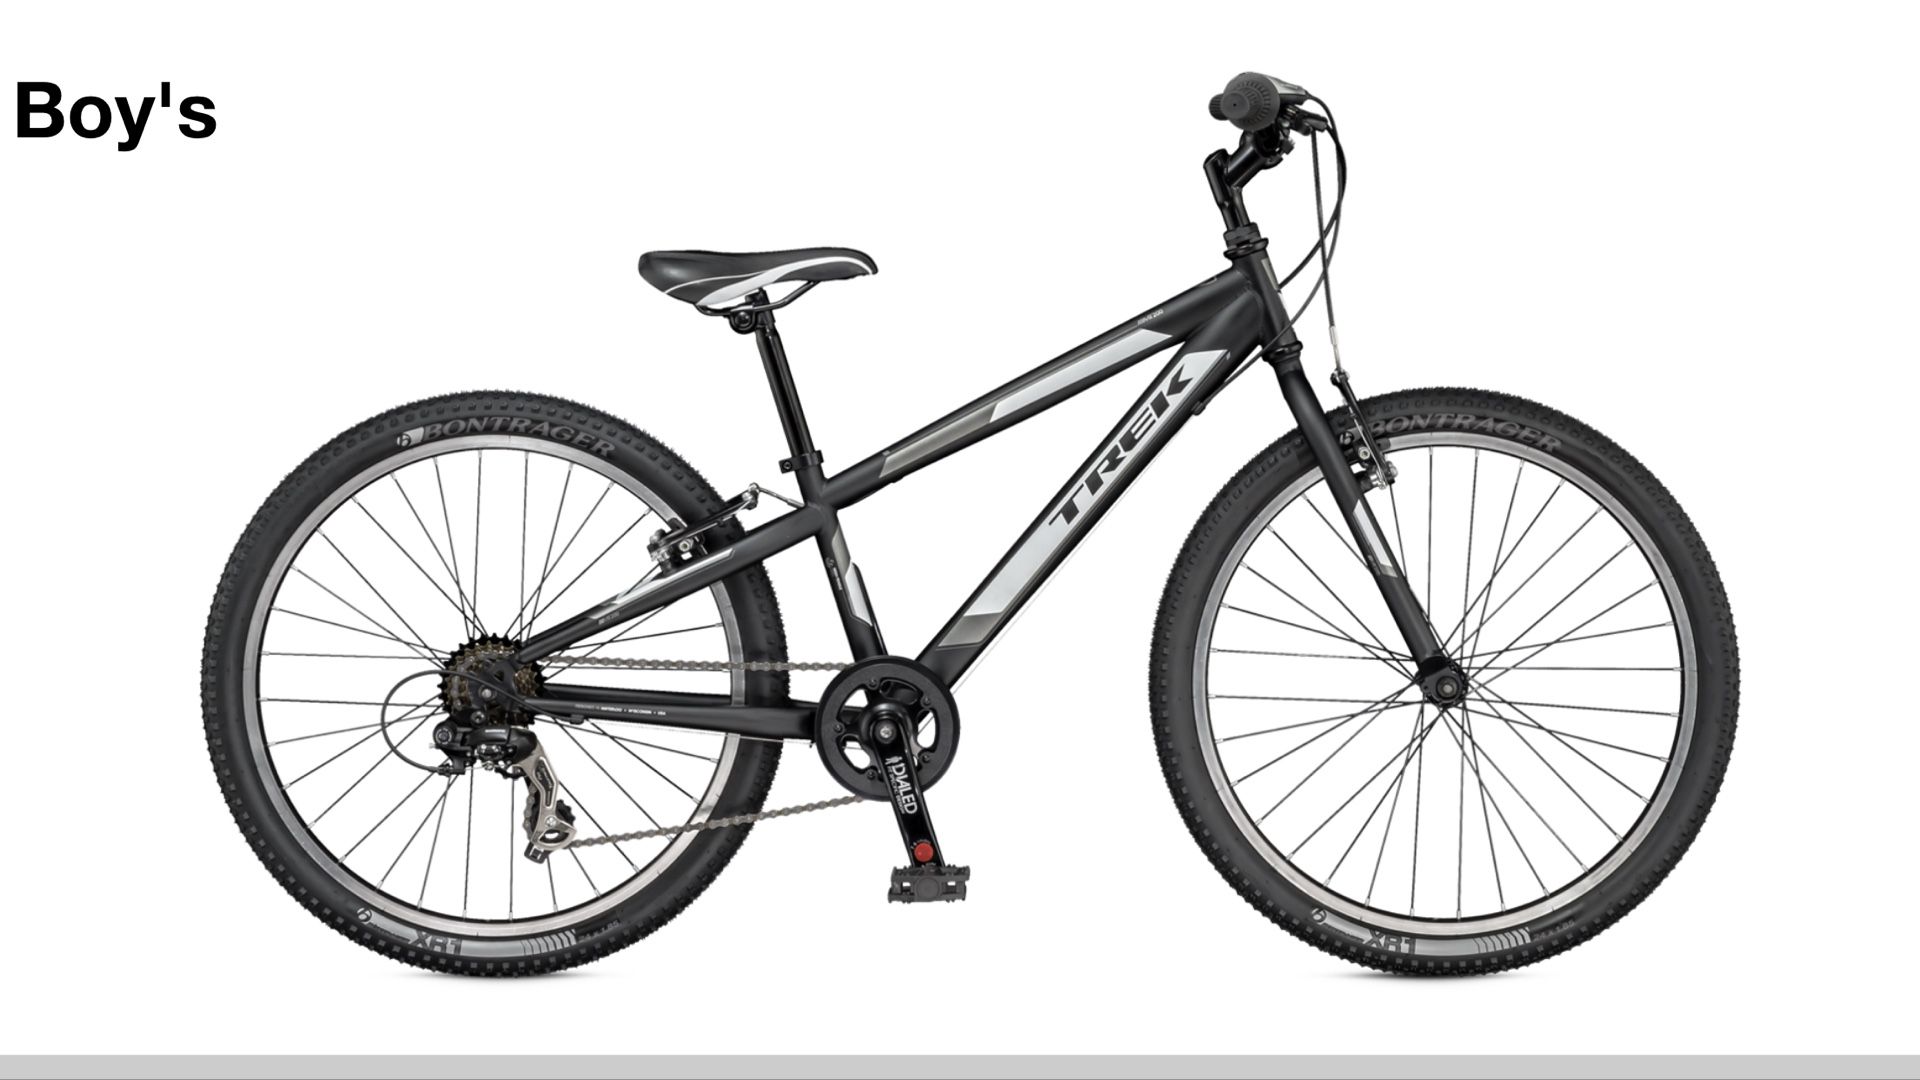 Trek MT200 mountain bicycle for sale cheap.